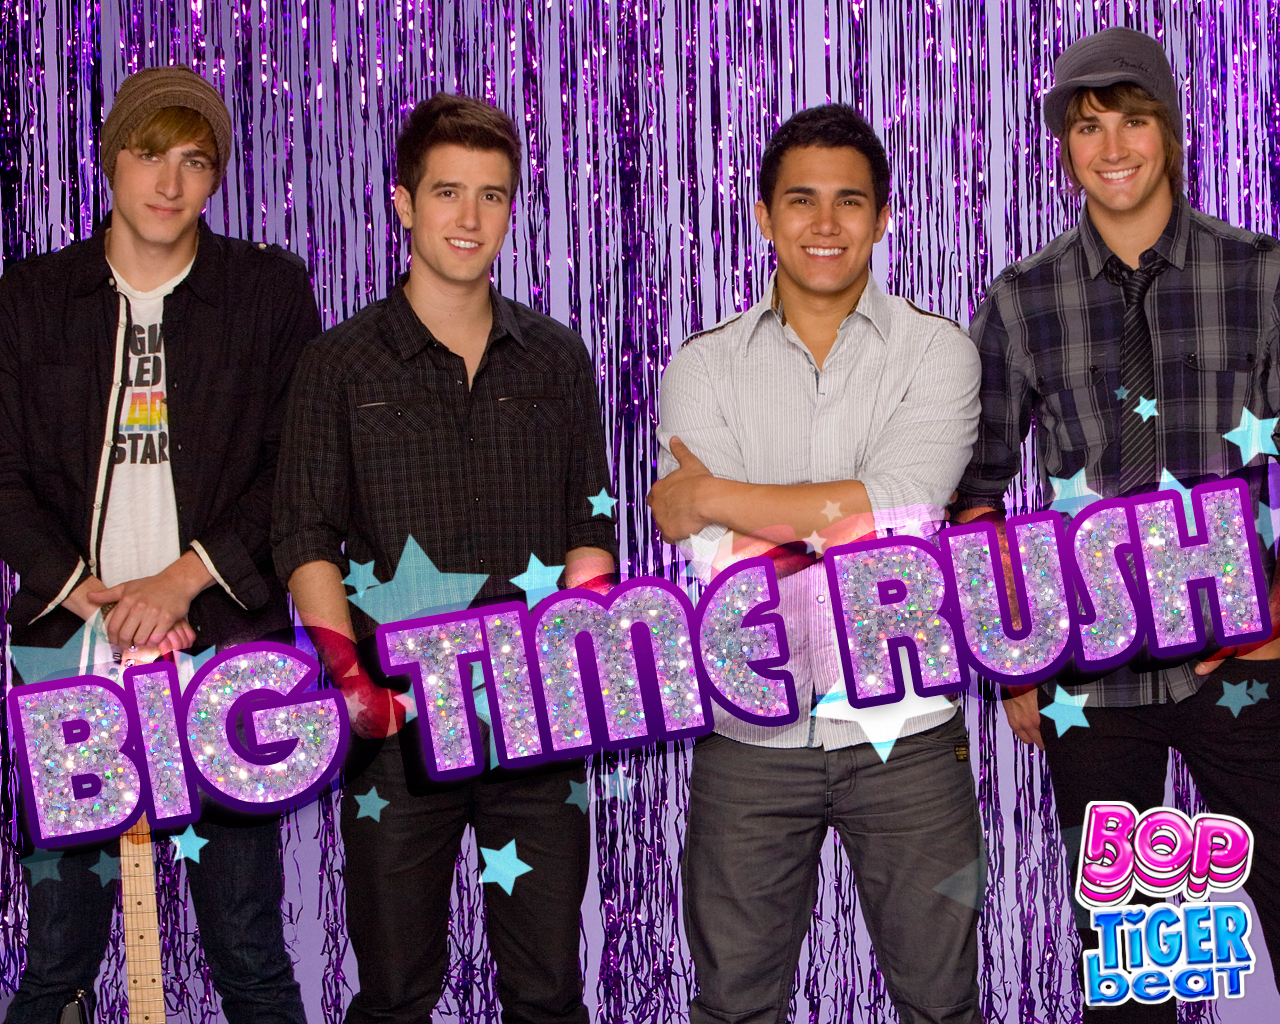 Fans Big Time Rush Image HD Wallpaper And Background